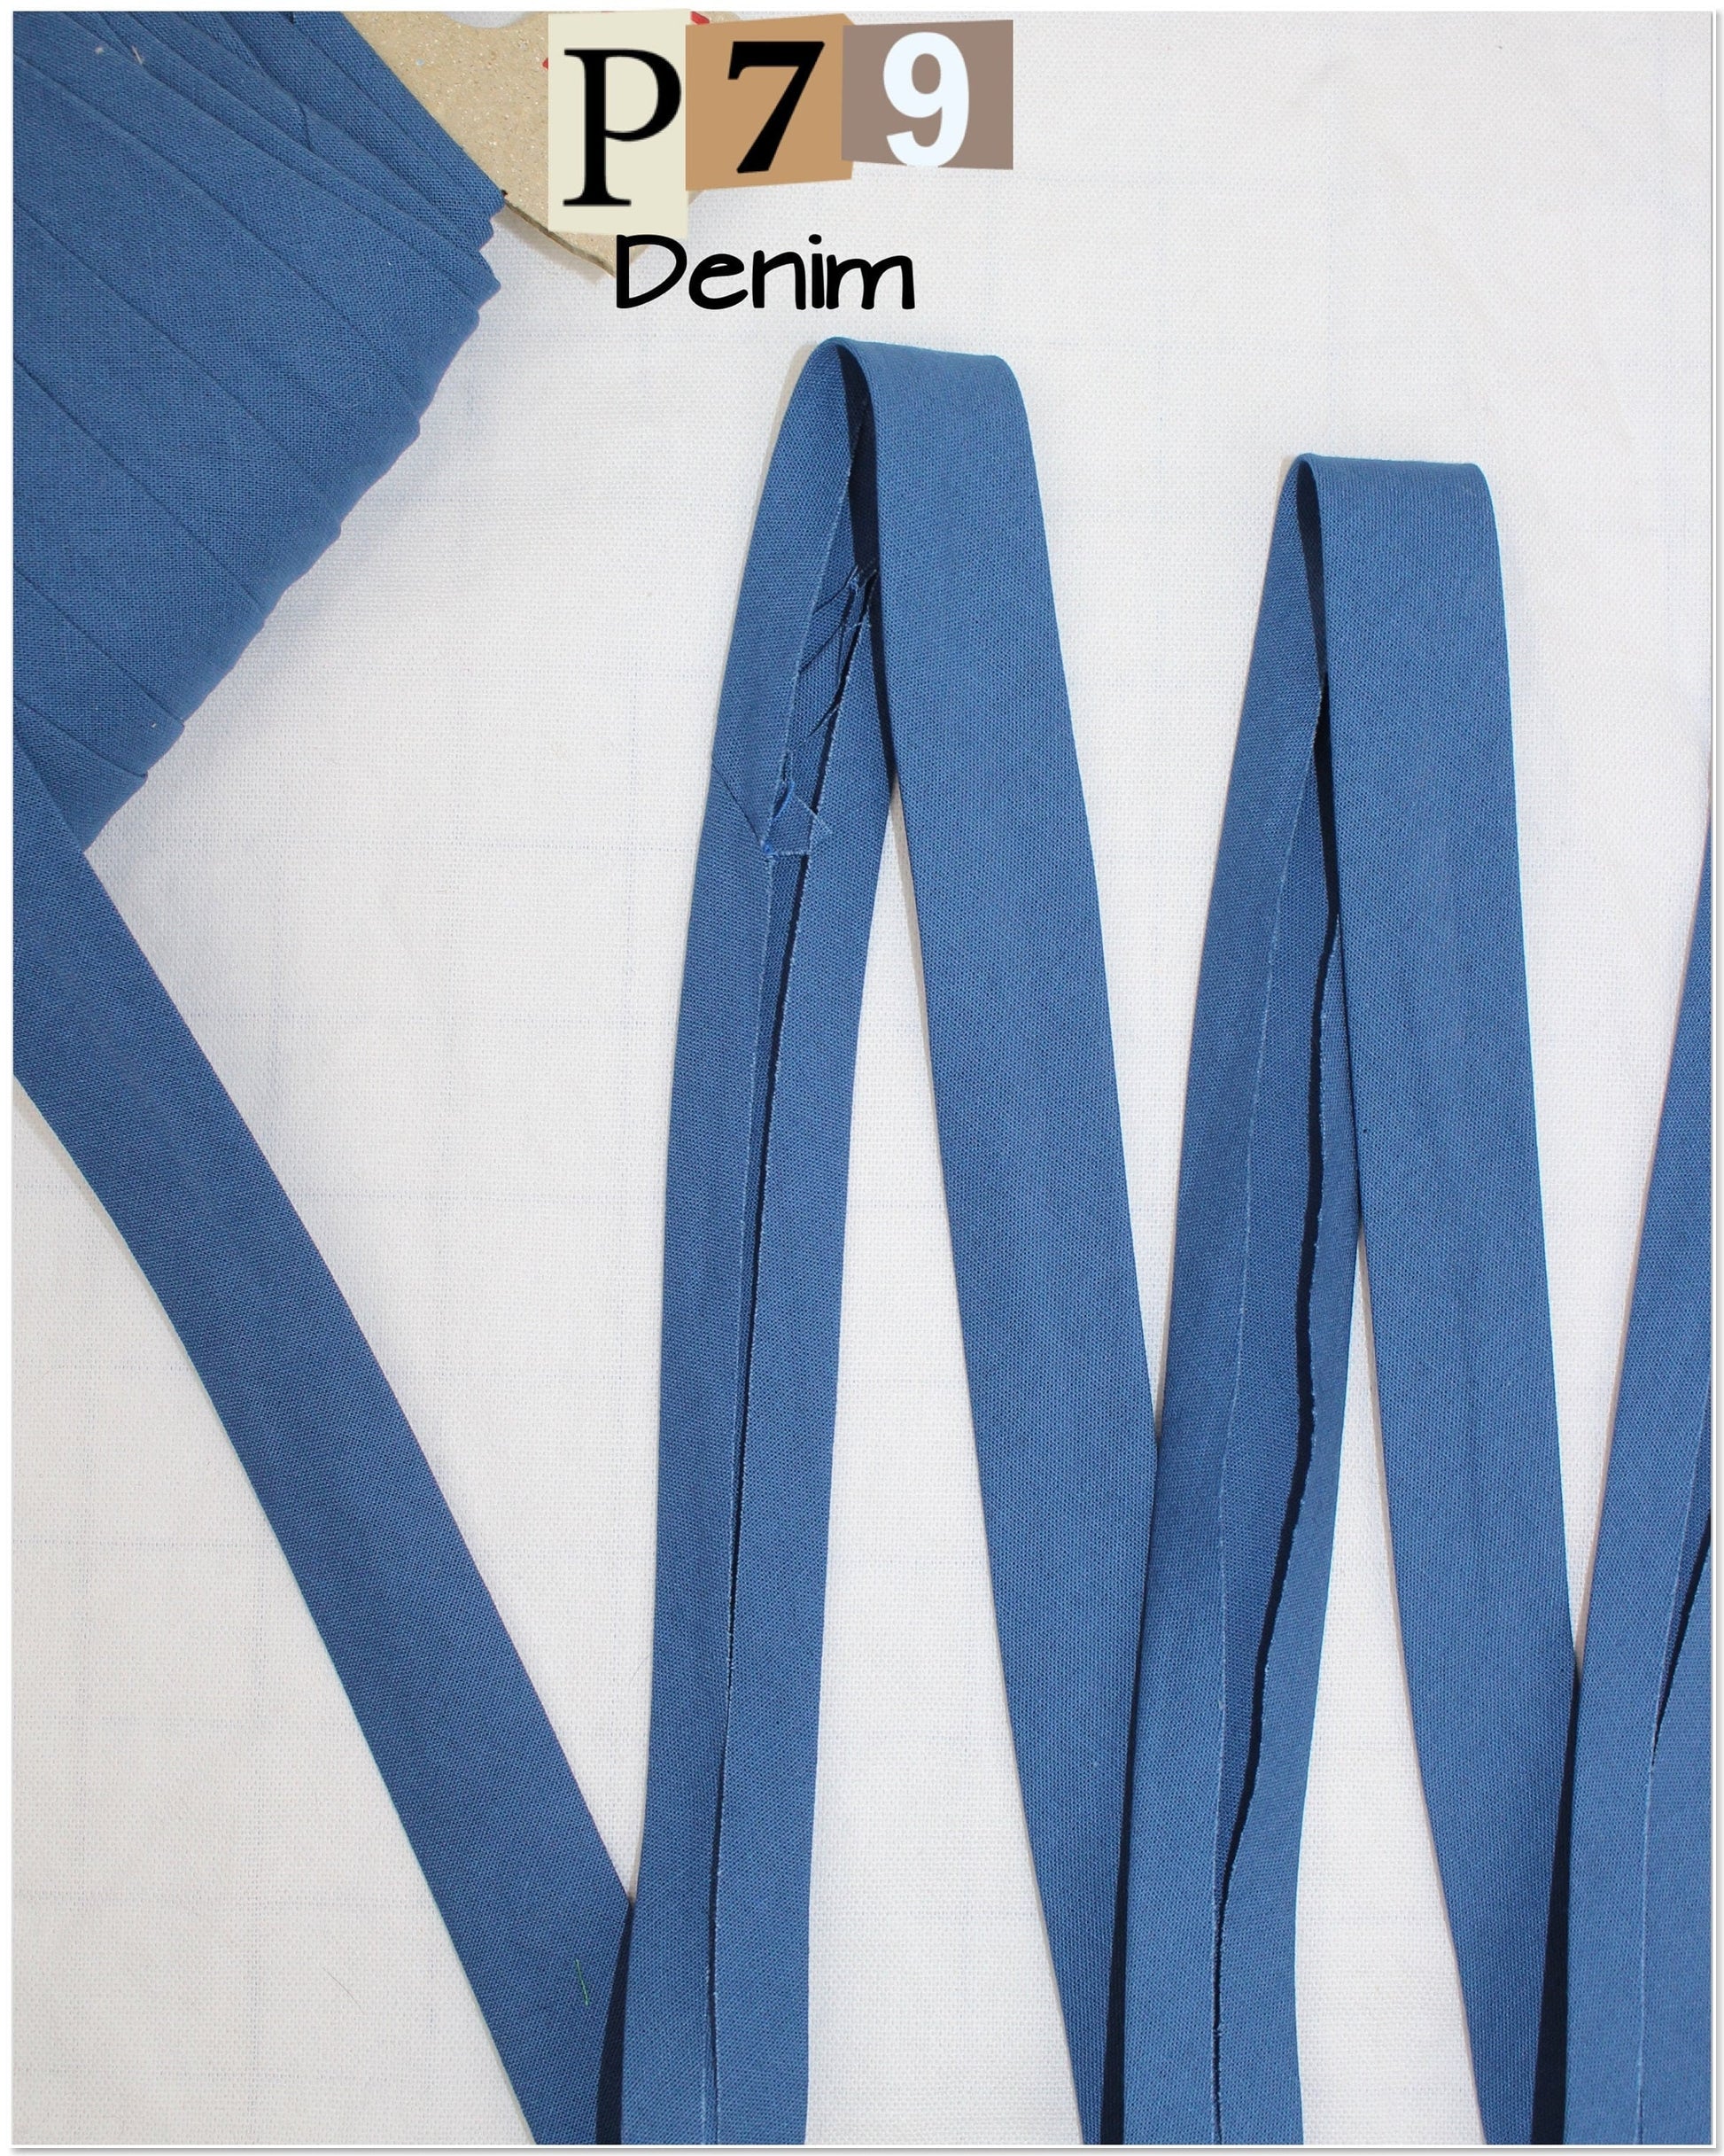 Bias Binding (tape) 25mm or 12mm, single fold, 100% Cotton. blue/light blue/dark blue/navy. Fusible iron on available.